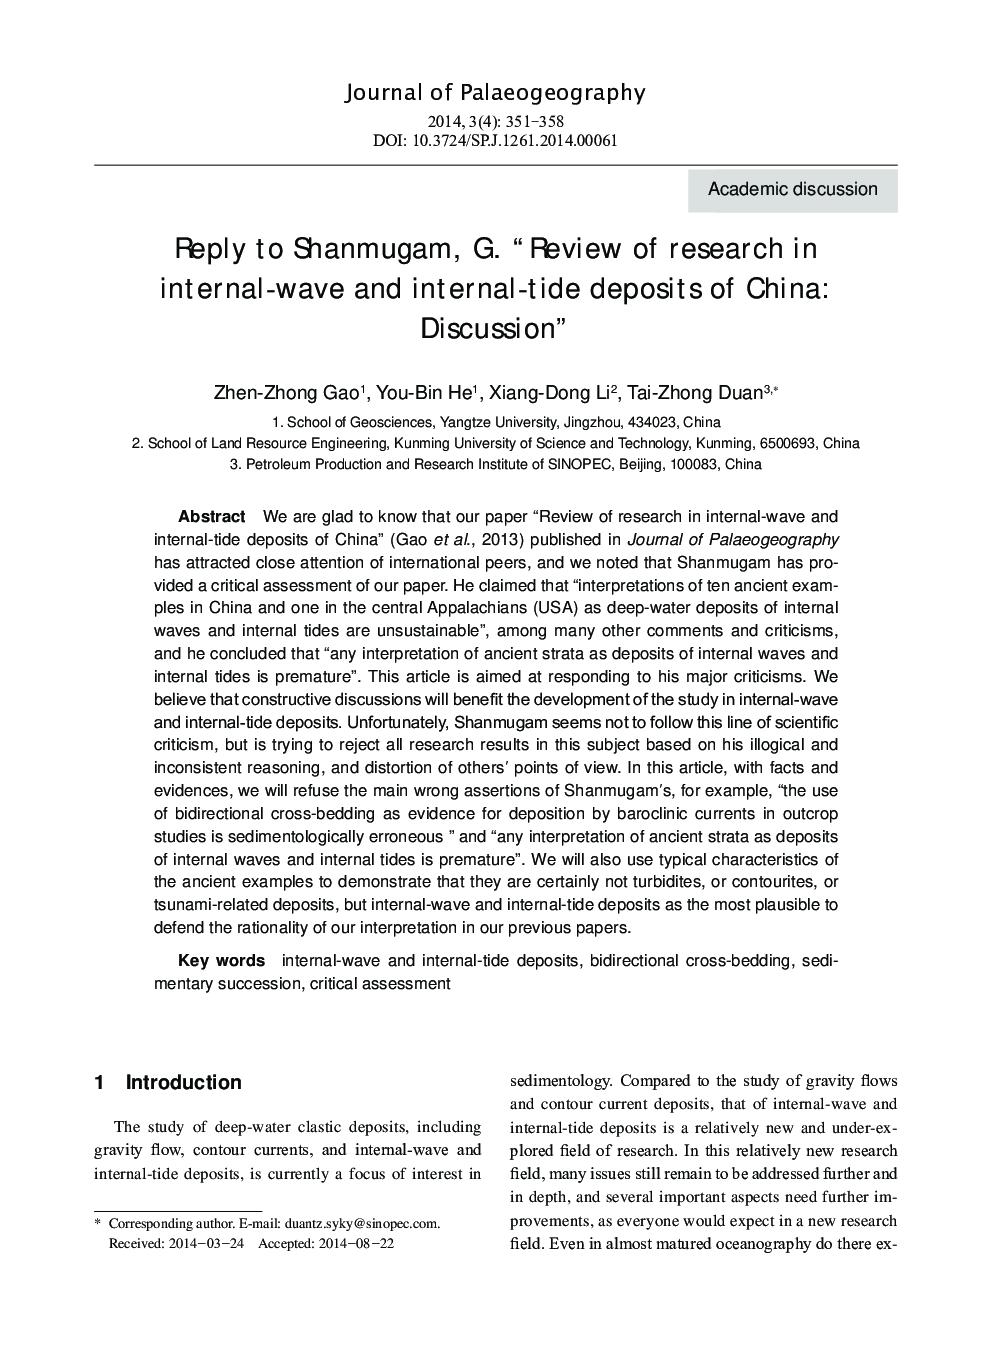 Reply to Shanmugam, G. “Review of research in internal-wave and internal-tide deposits of China: Discussion”